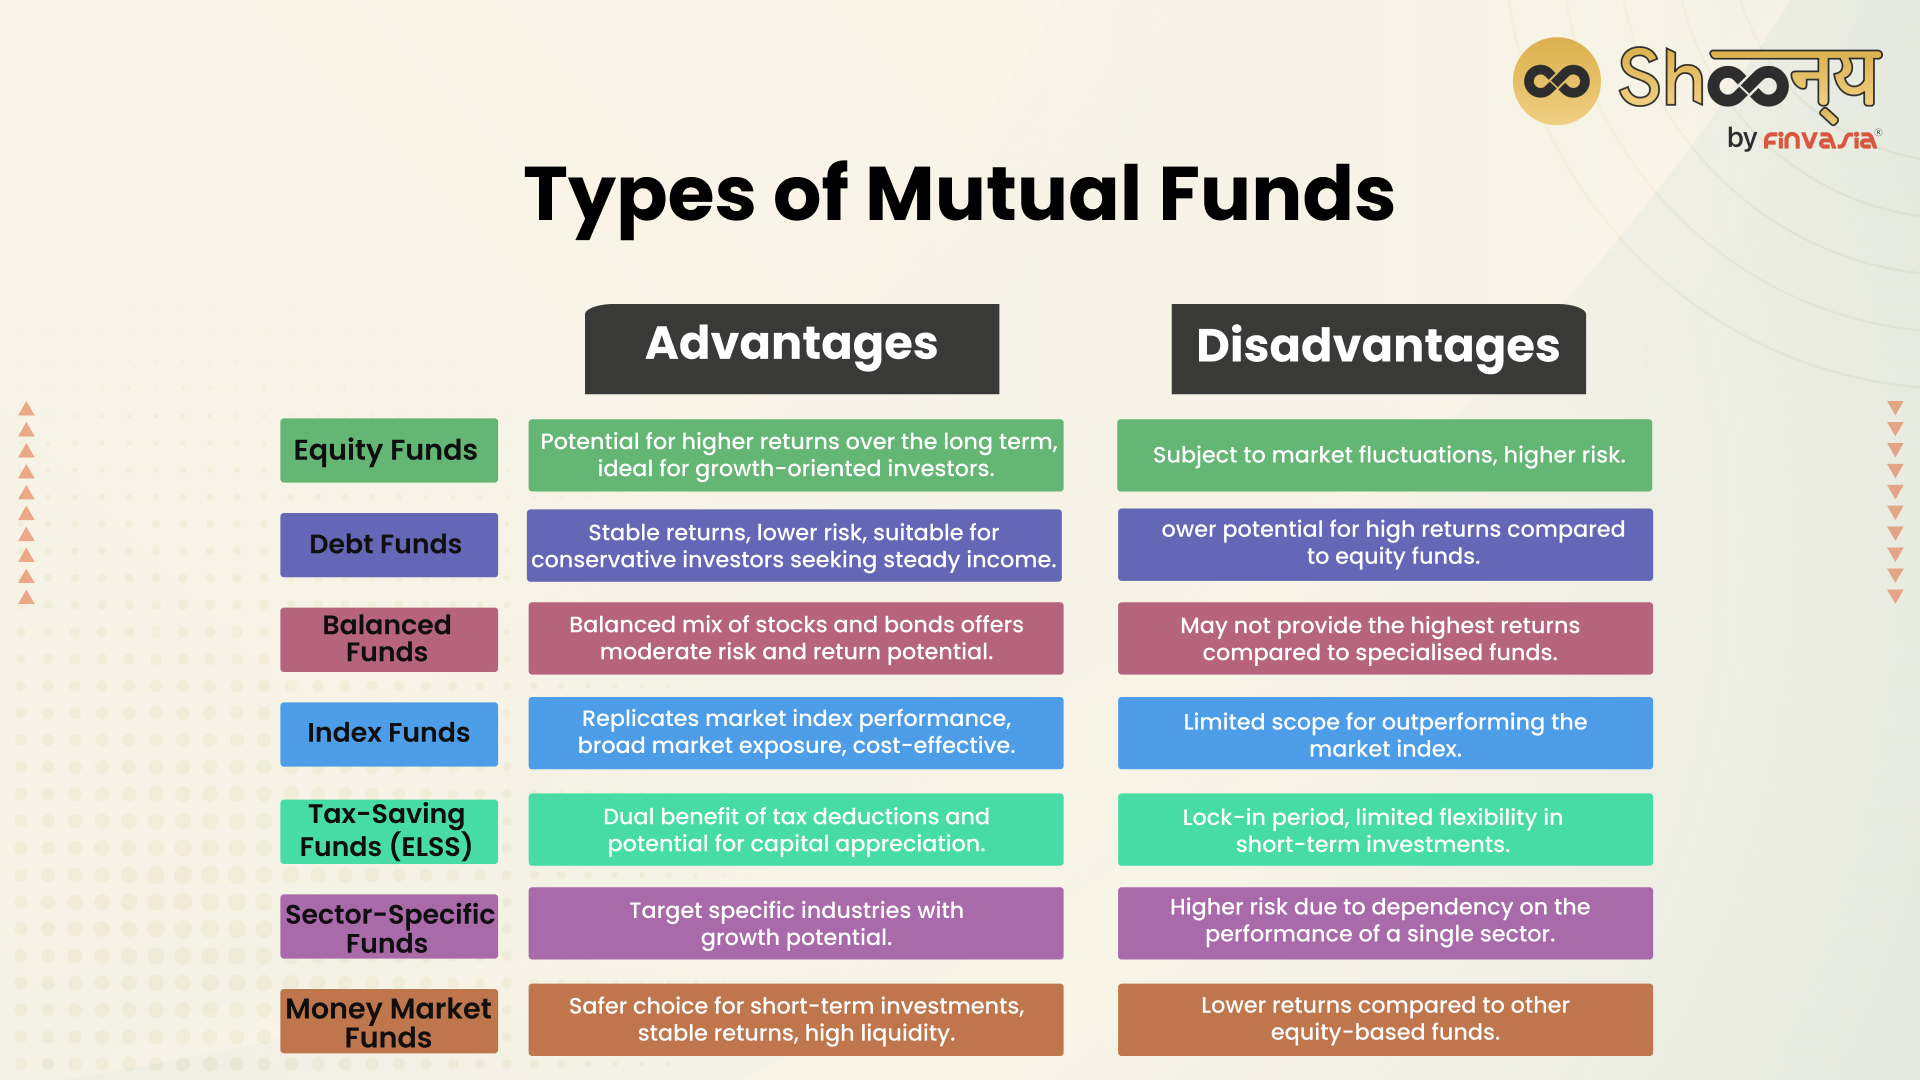 Types of Mutual Funds: